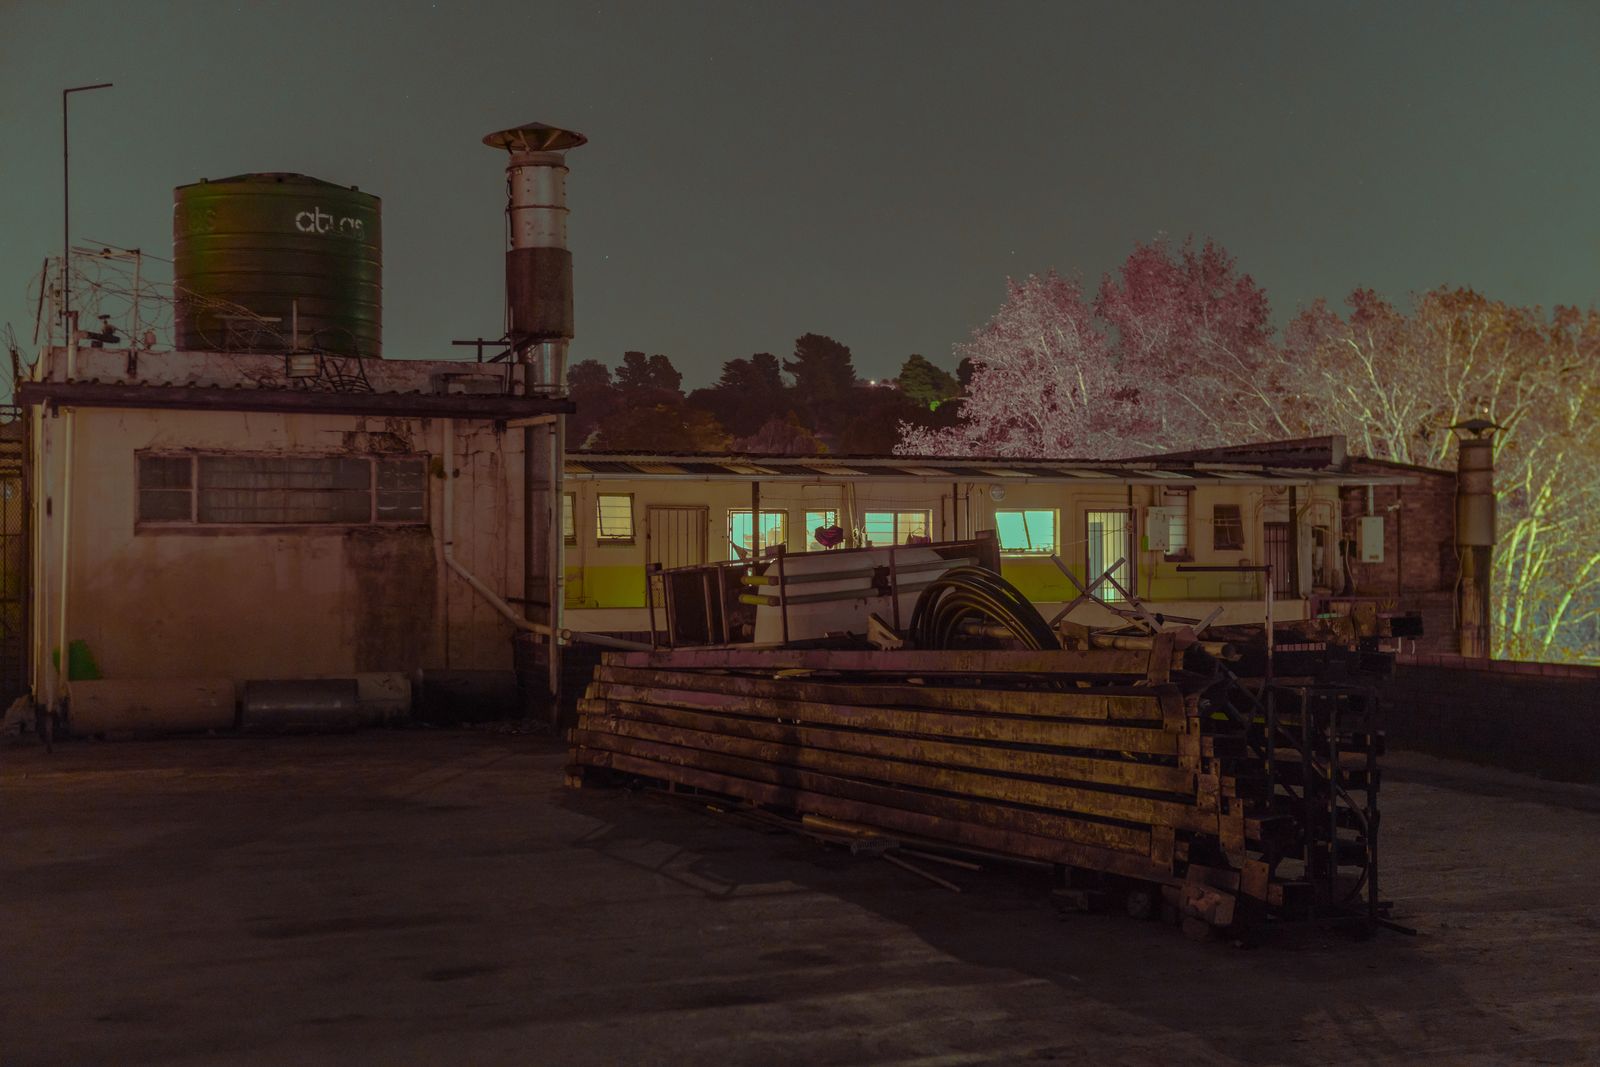 © Elsa Bleda - Image from the Chinatowns in Africa photography project